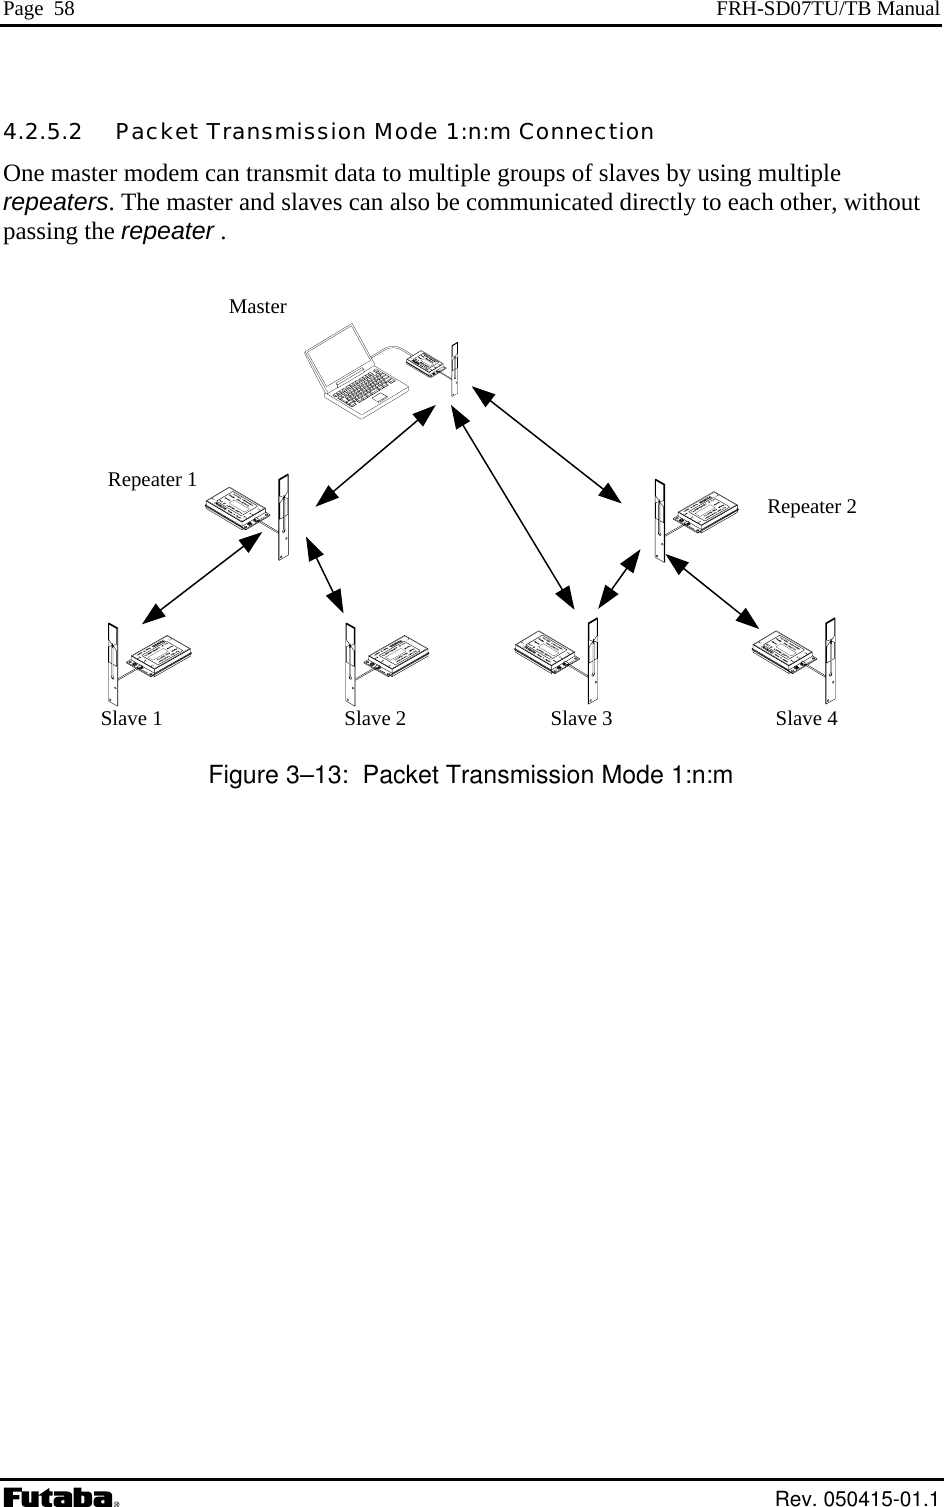 Page  58  FRH-SD07TU/TB Manual 4.2.5.2   Packet Transmission Mode 1:n:m Connection cated directly to each other, without                                                       One master modem can transmit data to multiple groups of slaves by using multiple repeaters. The master and slaves can also be communipassing the repeater .  Master                                                                                                                              Figure 3–13:  Packet Transmission Mode 1:n:m Repeater 2 Repeater 1 Slave 1  Slave 2 Slave 4 Slave 3 Rev. 050415-01.1 